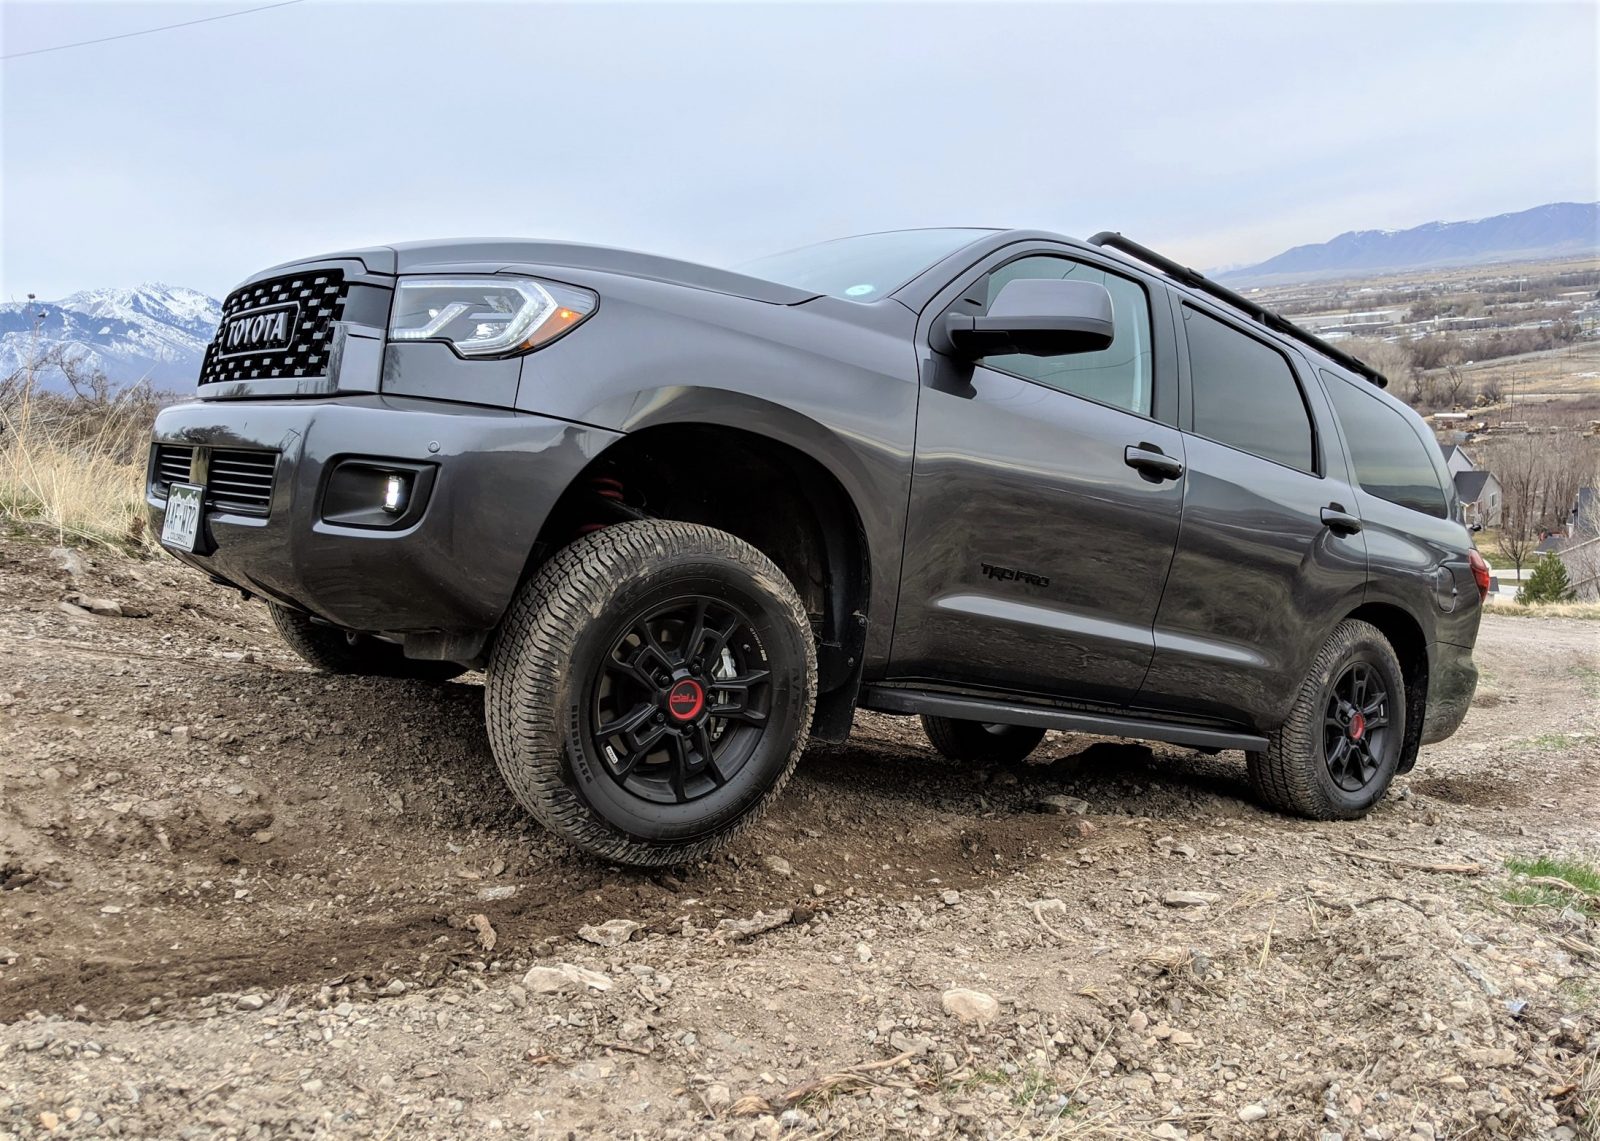 2020 Toyota Sequoia Trd Pro Off Road Review By Matt Barnes Latest